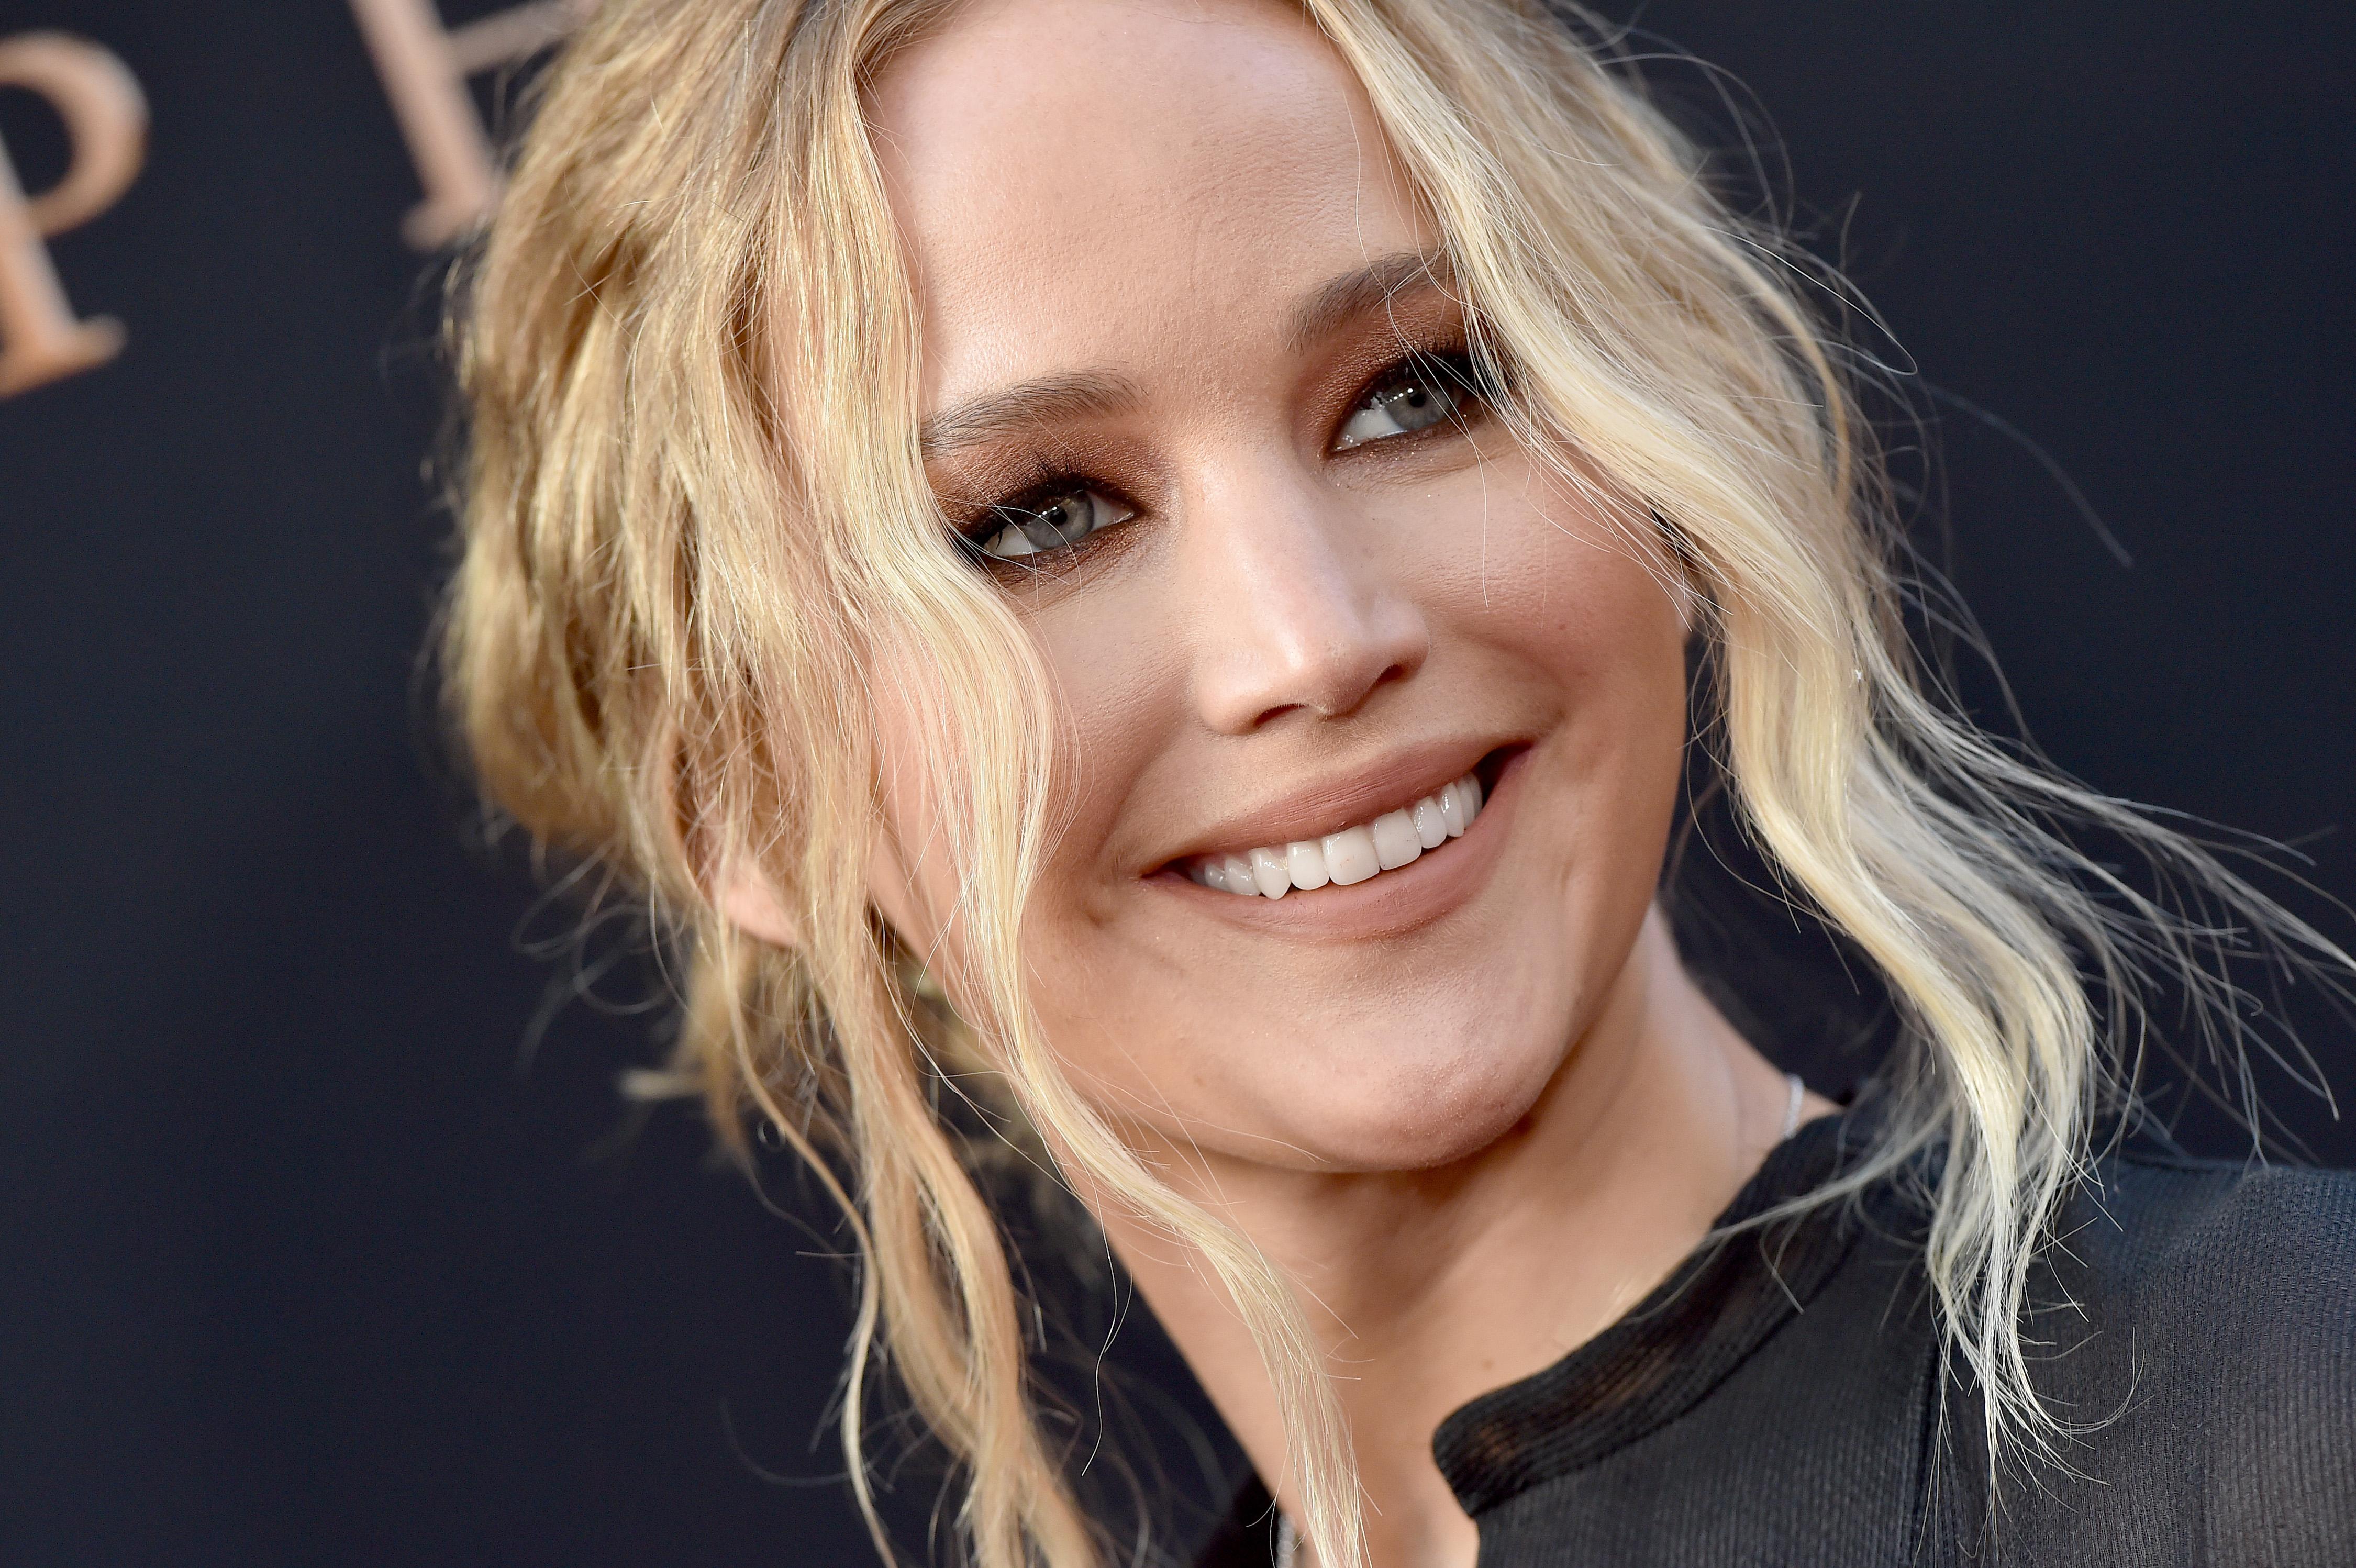 View Jennifer Lawrence Net Worth 2019 Images